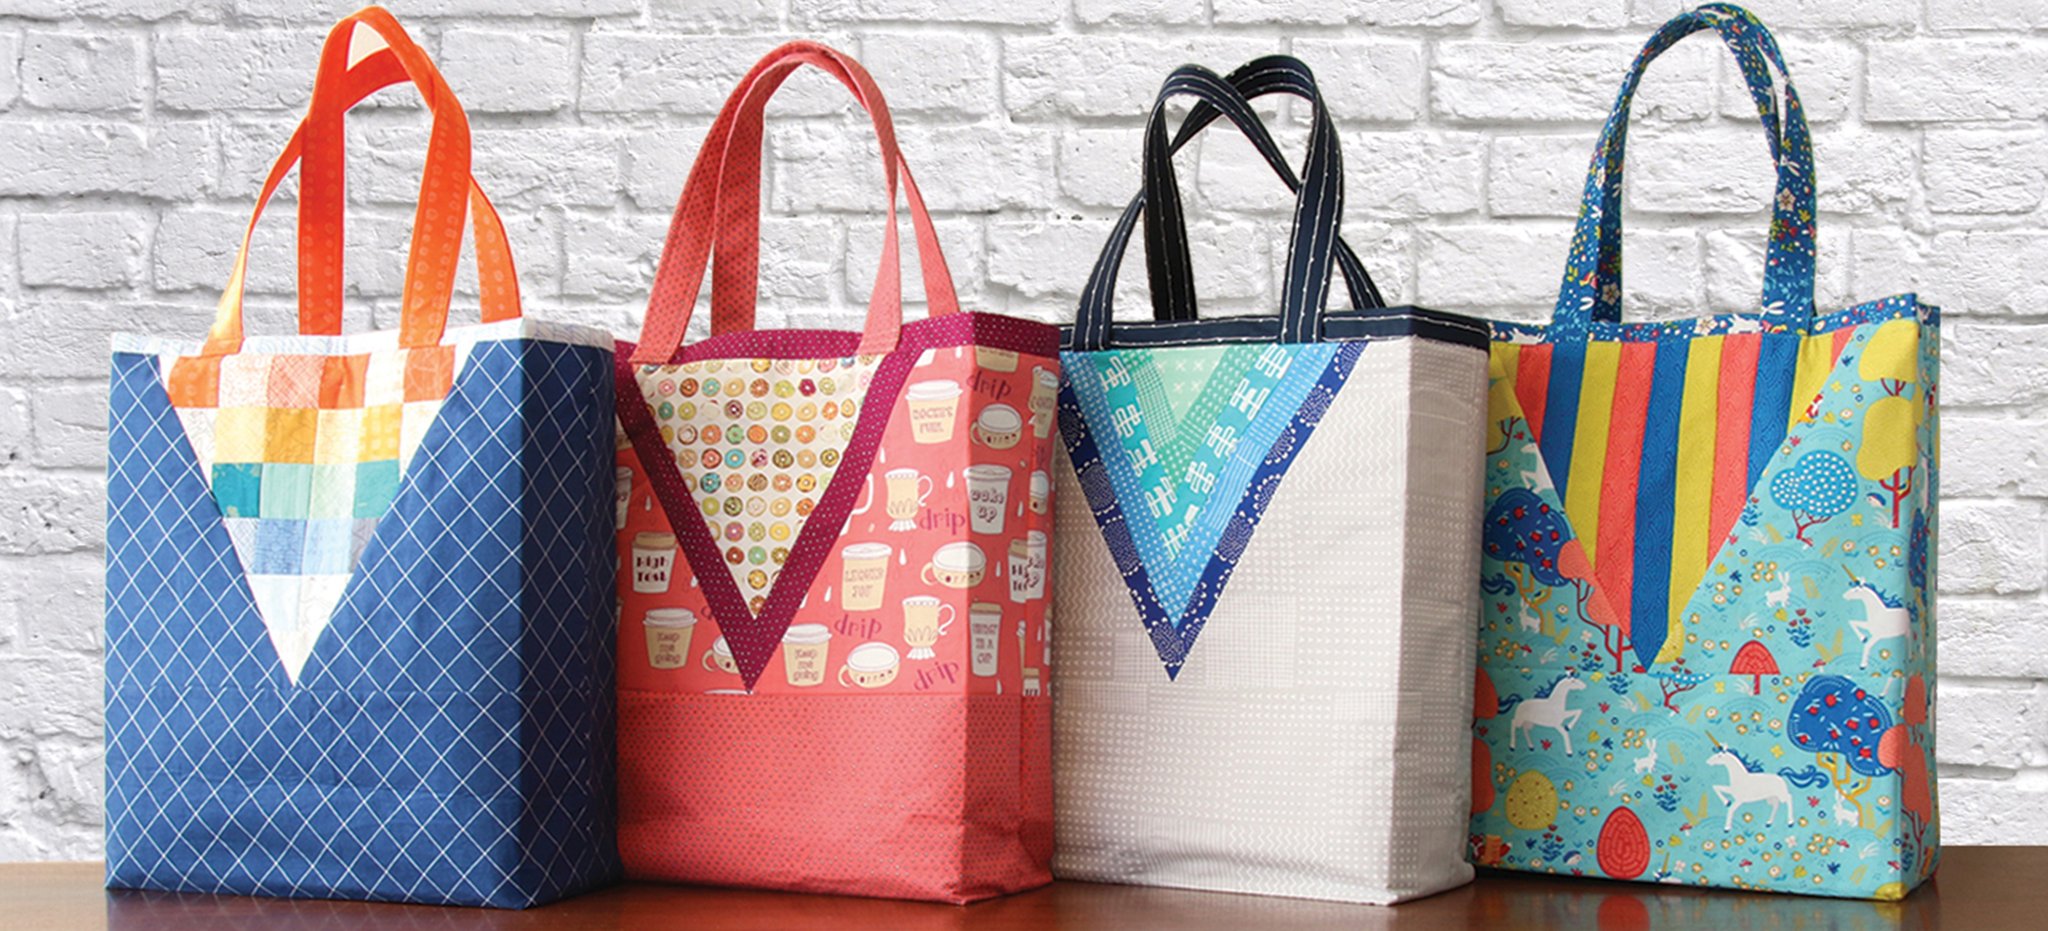 Introducing the Teddy Tote!